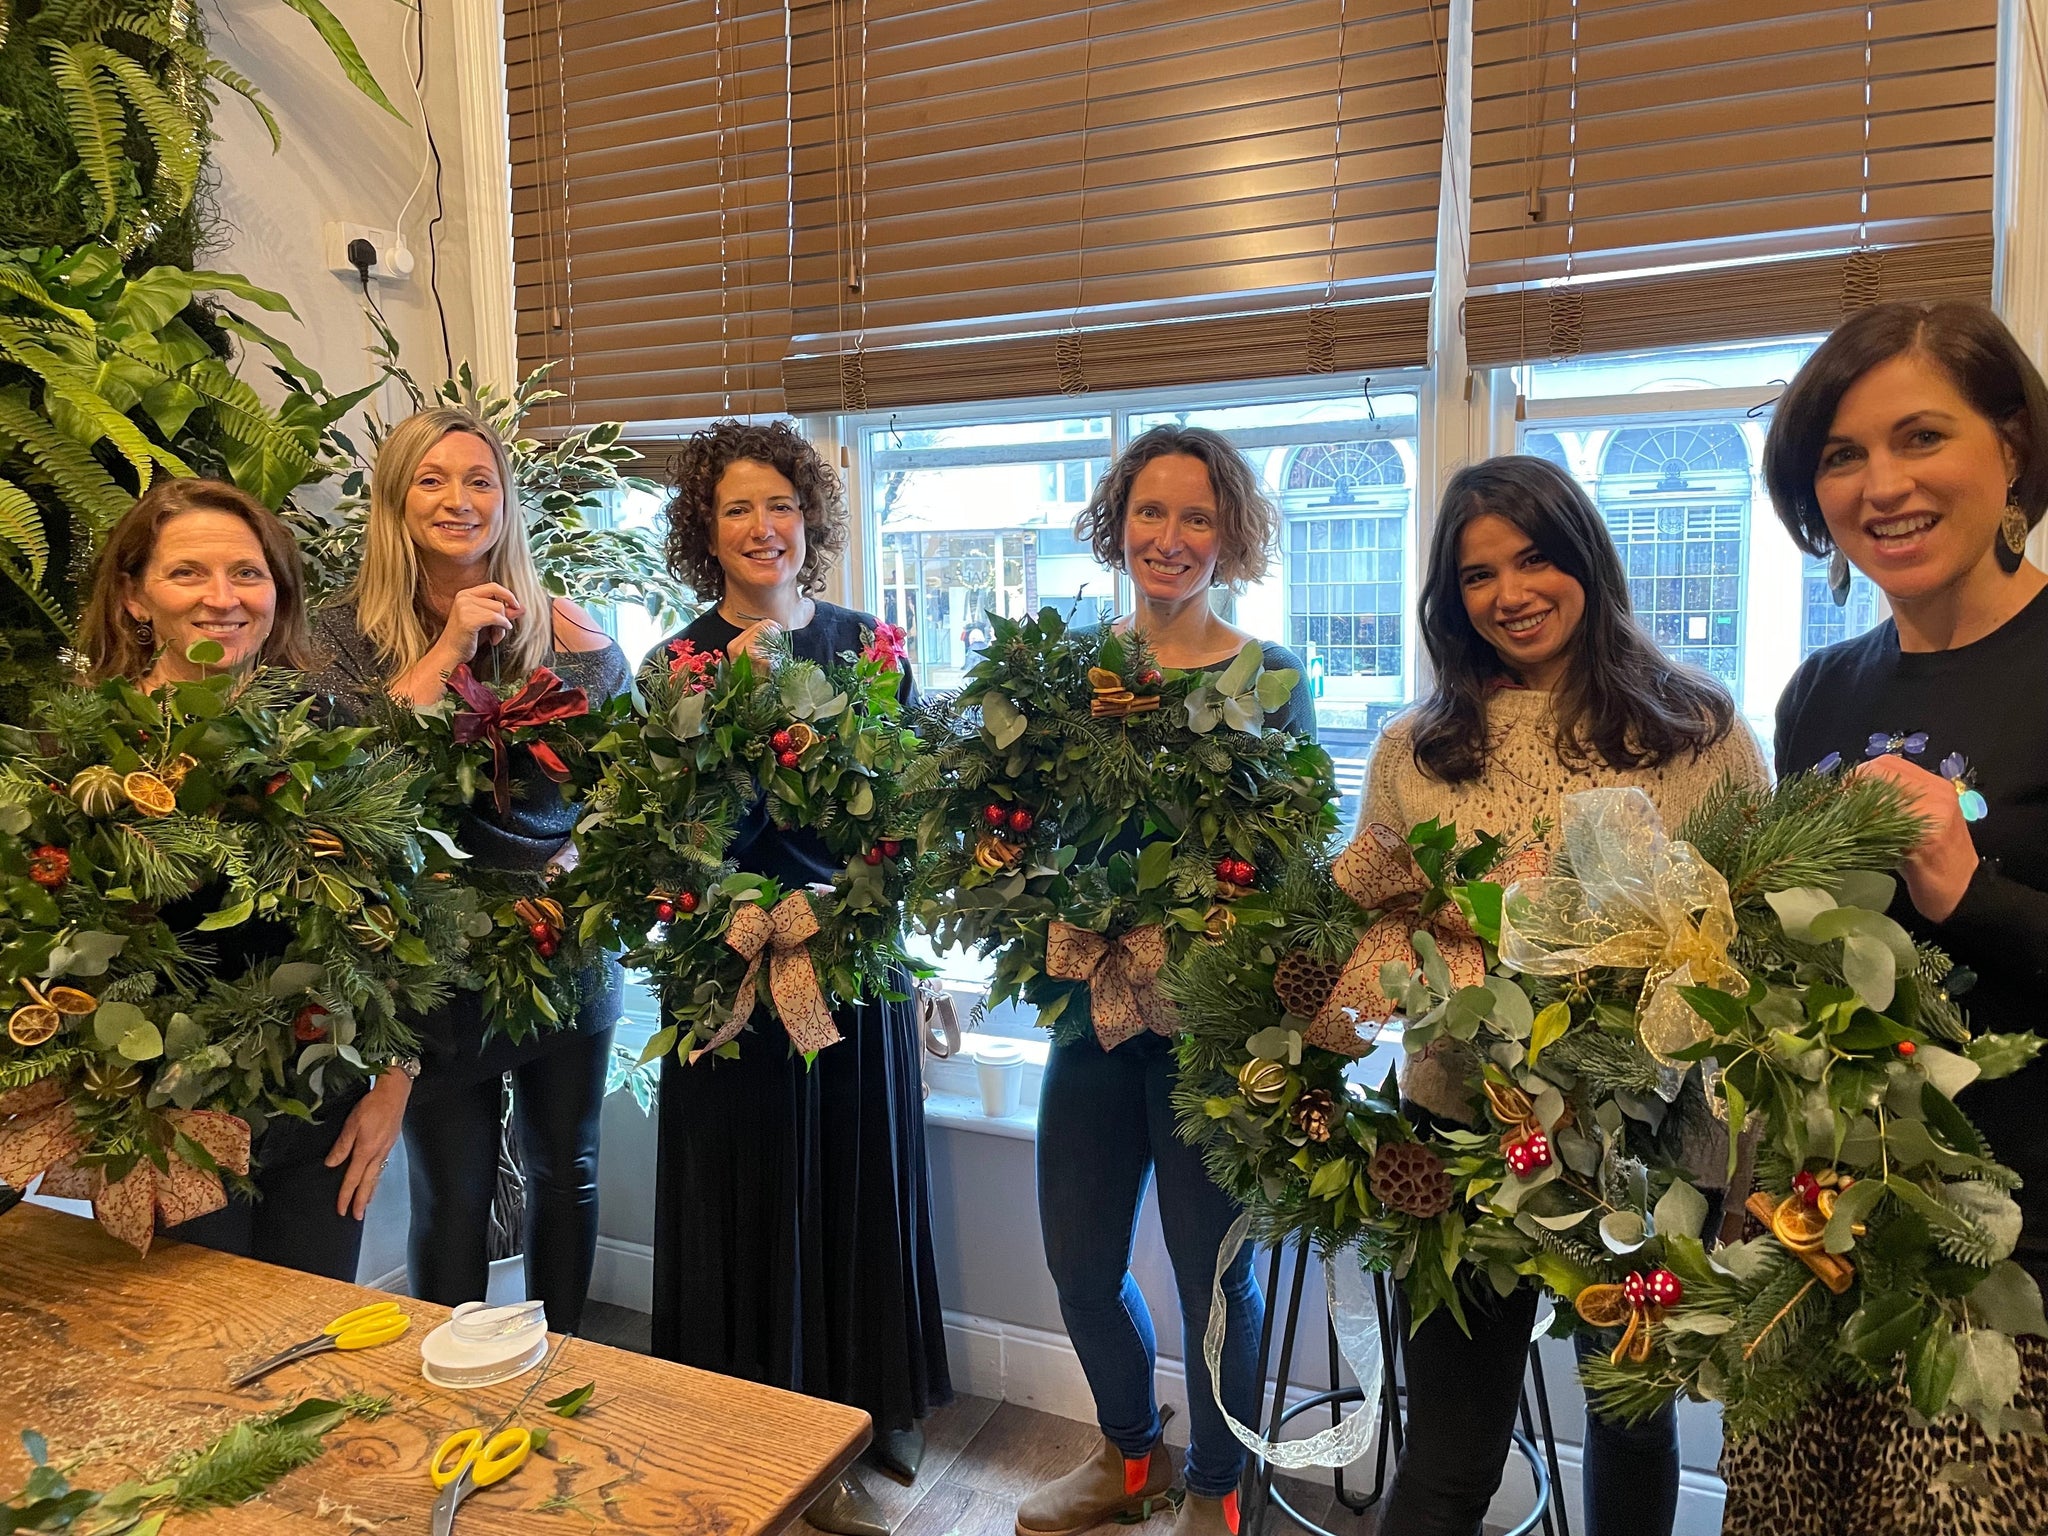 Christmas Wreath Workshop – Wednesday 13th December, Starting @ 11am (£75 per person) 2.5 hours